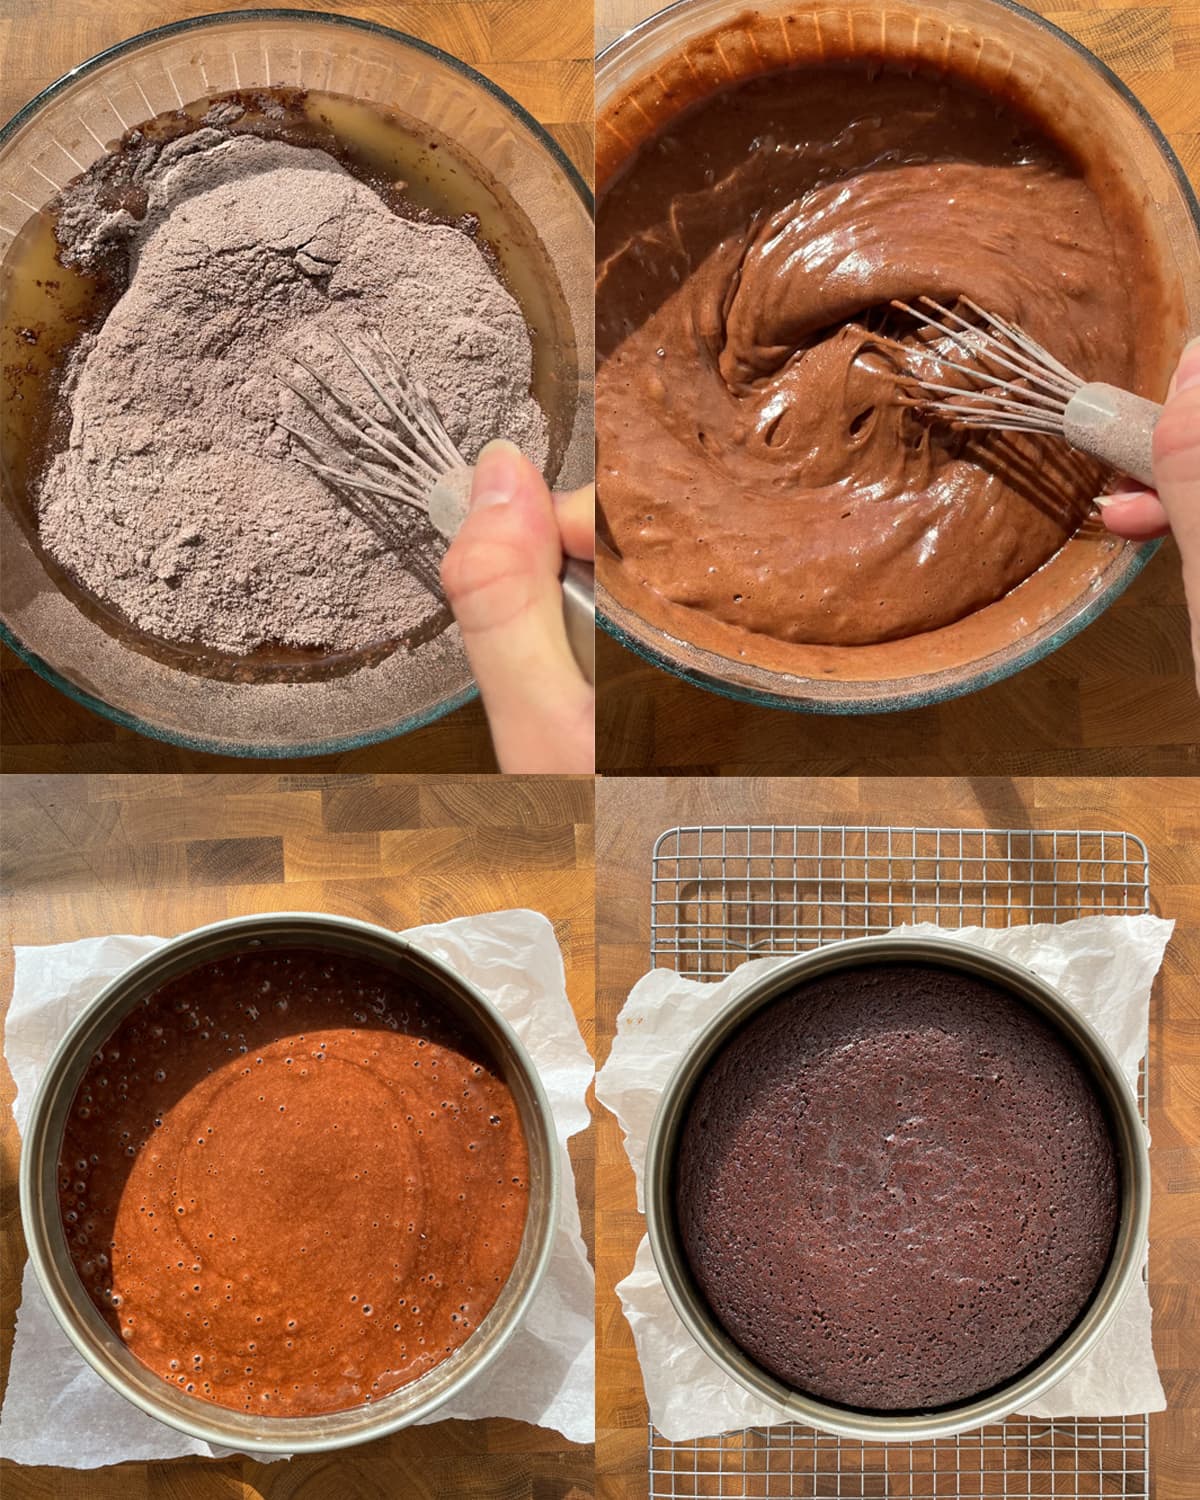 Process of mixing and baking a chocolate cake with wild rye cake mix. 